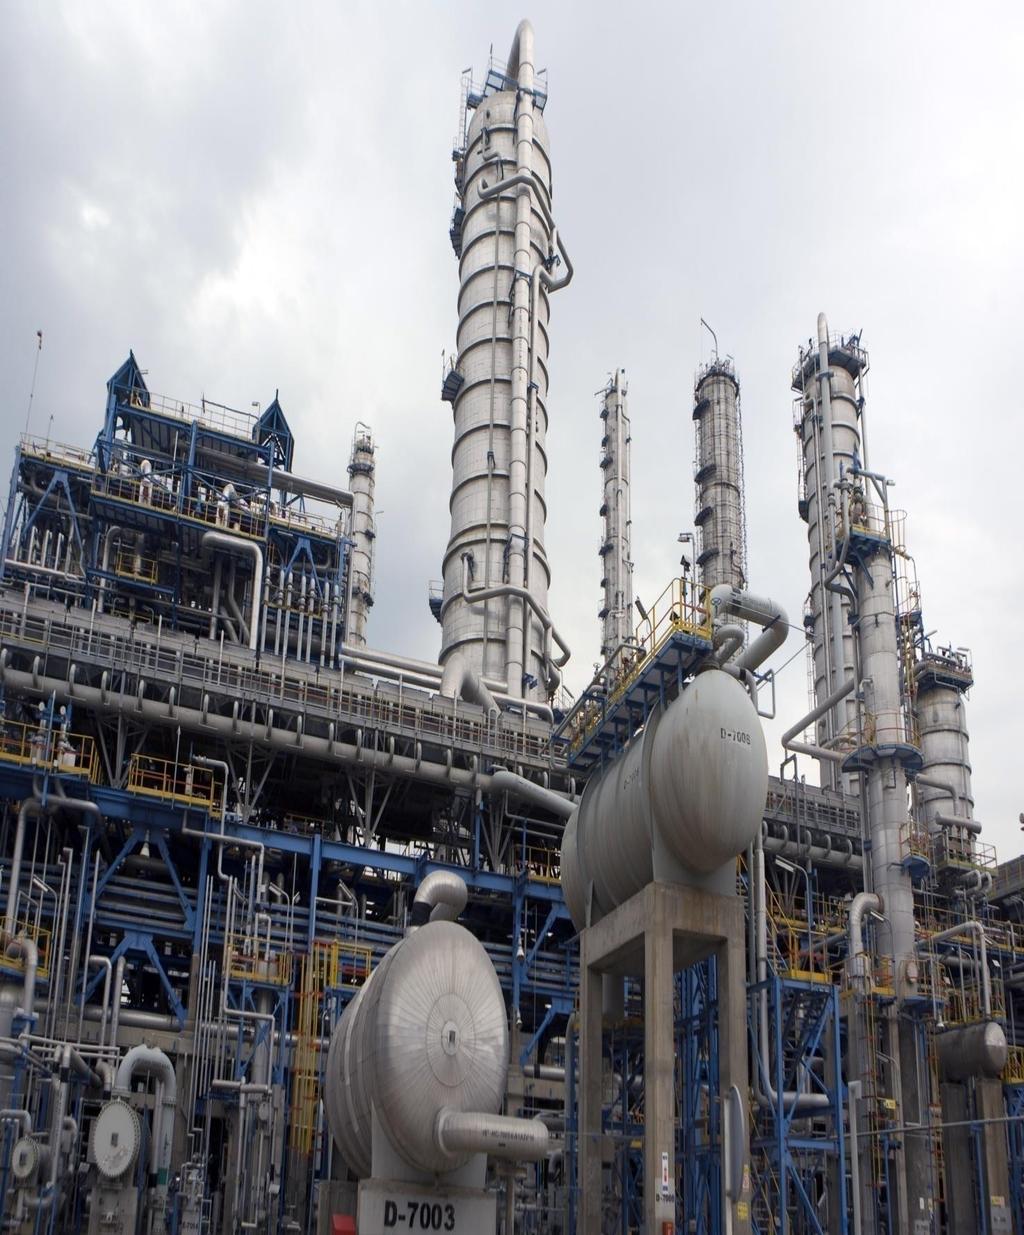 DEVELOPING THE WORKFORCE OF TODAY AND THE FUTURE In challenging times, petrochemical companies cannot aﬀord to pour resources (time and money) into generalized development, expecting that they will